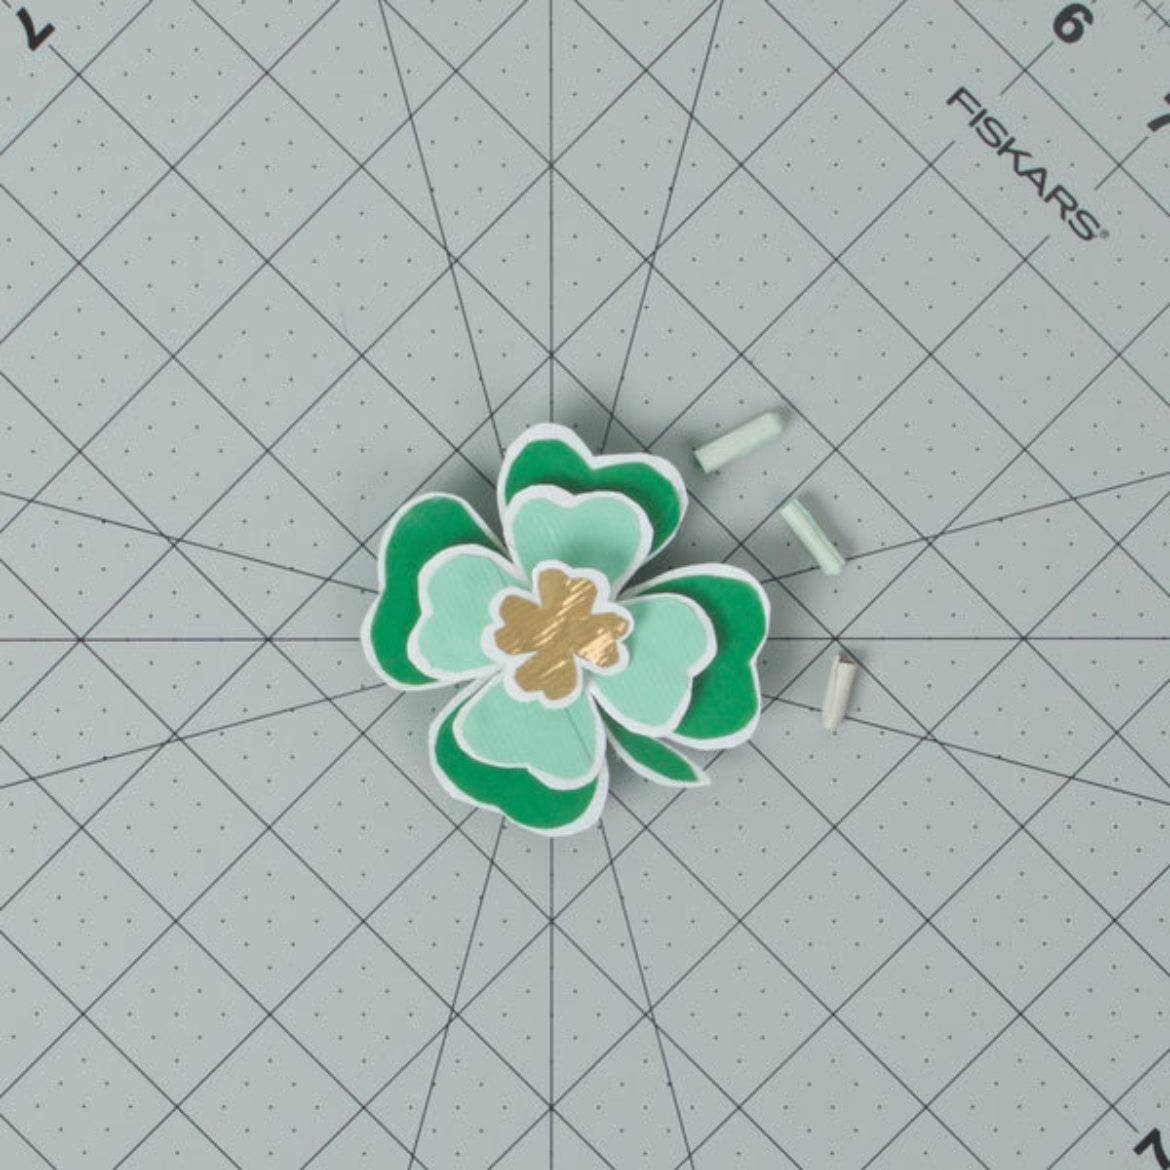 Tape the medium sized clover the the larger one, then tape the smallest clover to the medium clover. Tape a magnet to the back of the clover